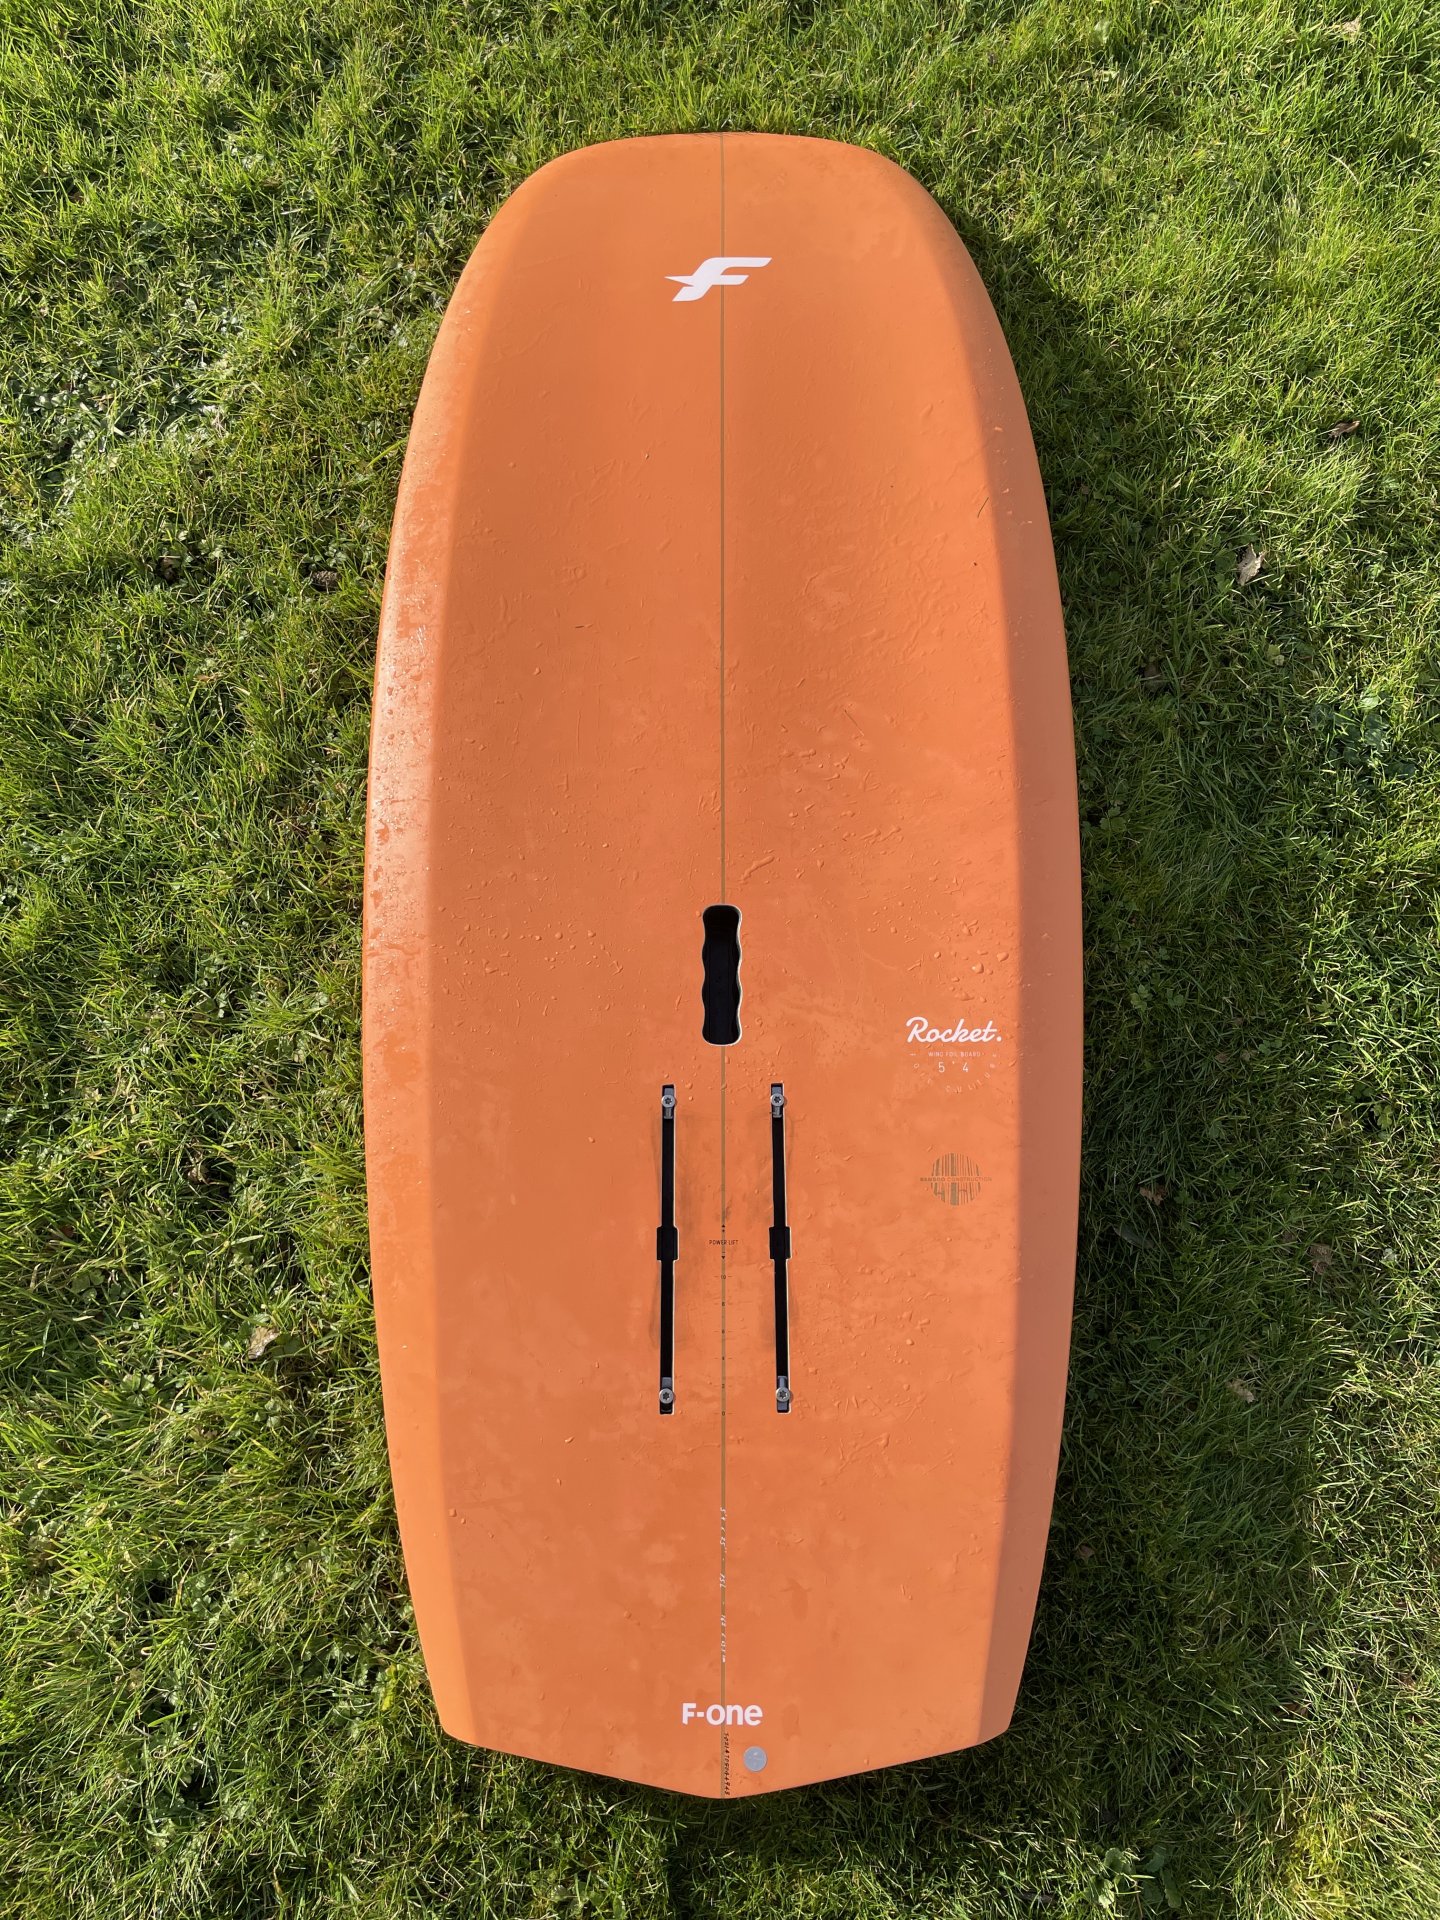 F-One Rocket Wing V2 5'4 2022 | Wing Foiling, SUP And Surf Reviews 